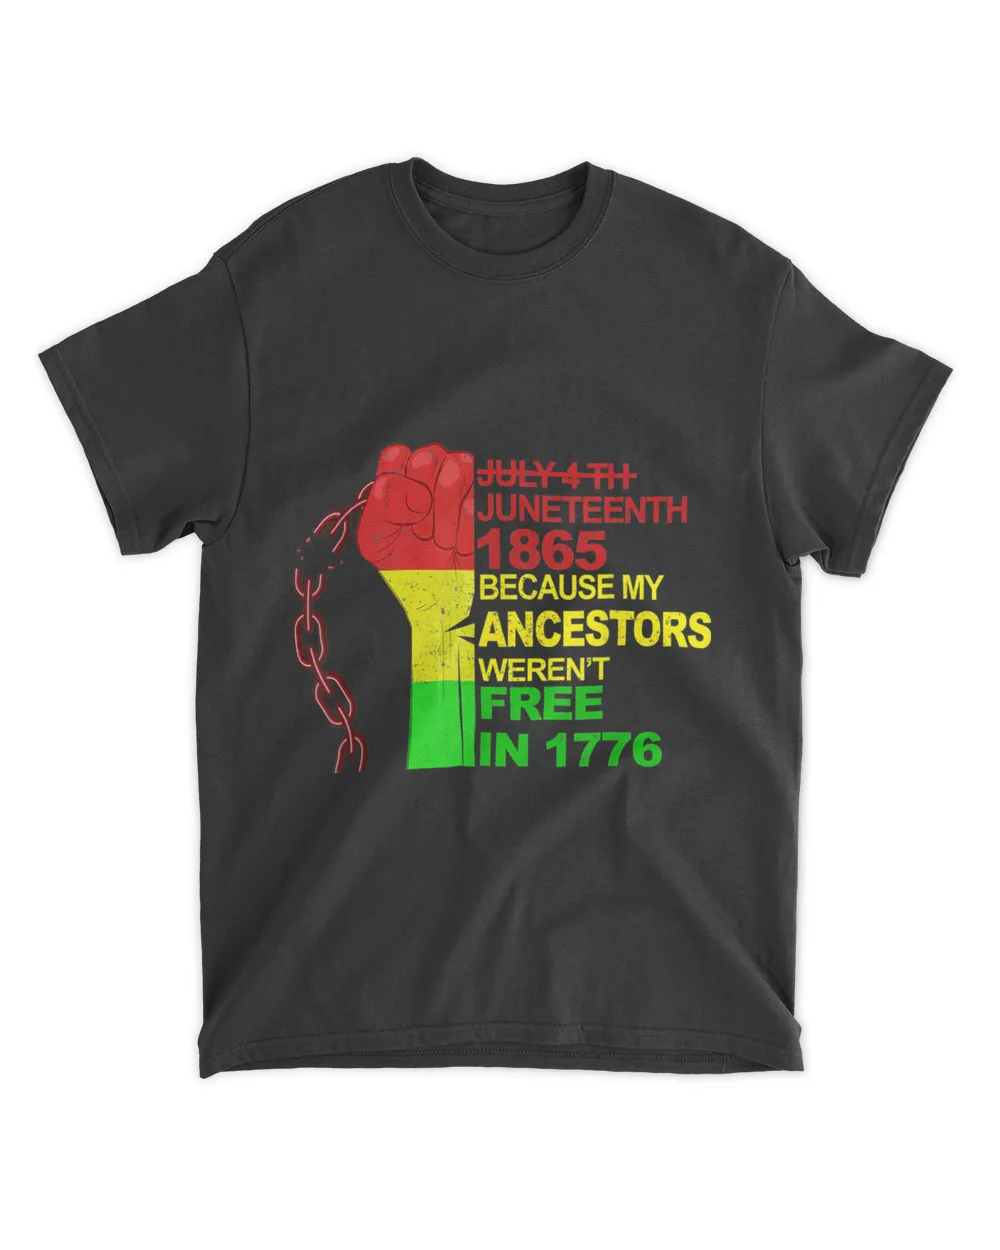 July 4th Juneteenth 1865 Celebrate African Americans Freedom T-Shirt (2)